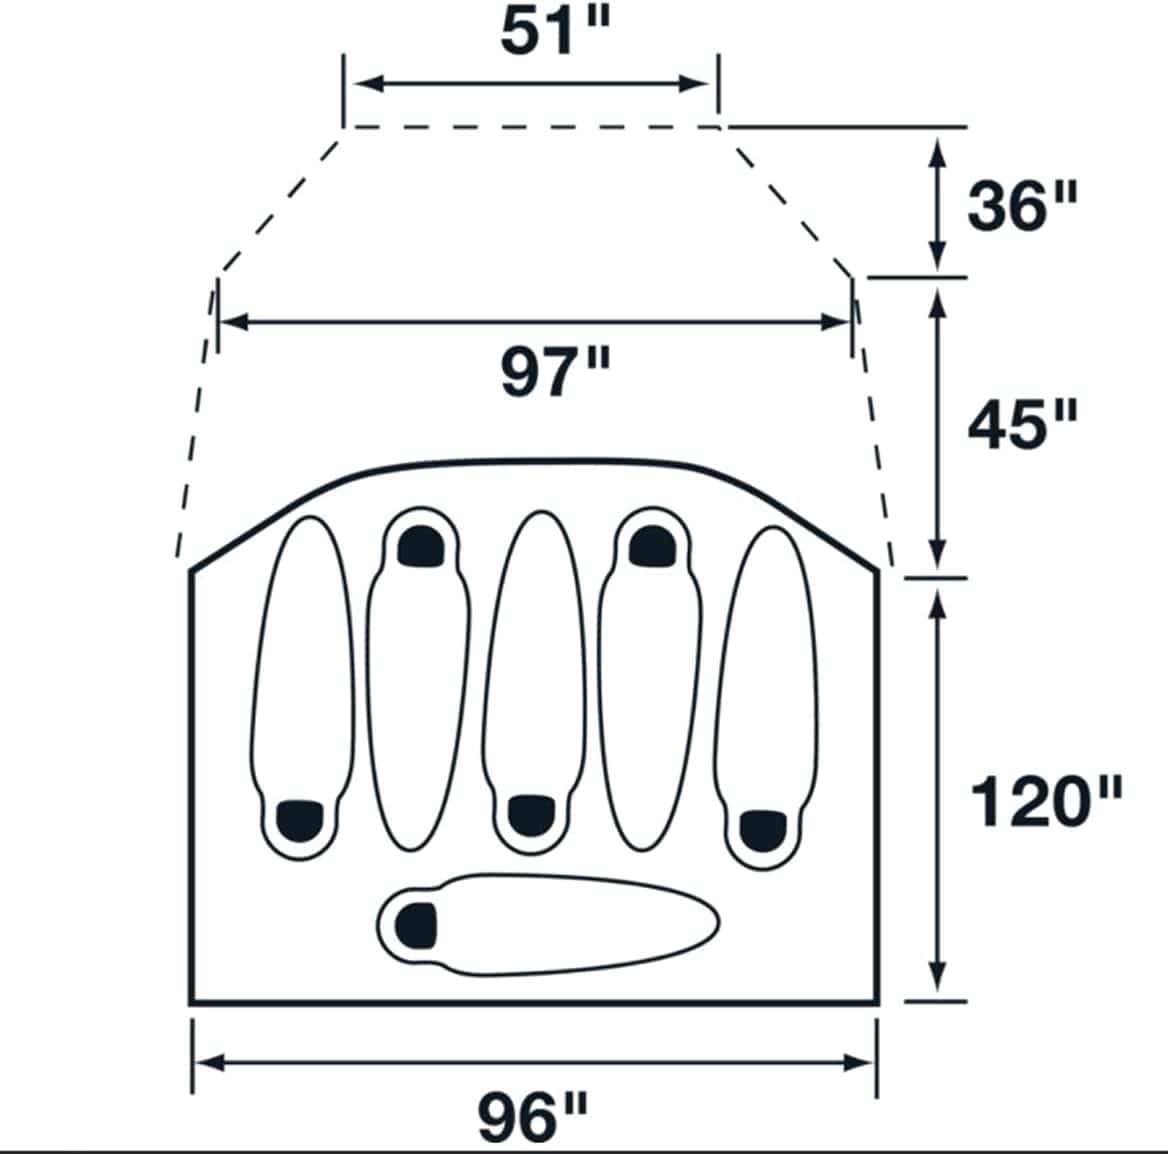 THE NORTH FACE Wawona 6 Tent specs